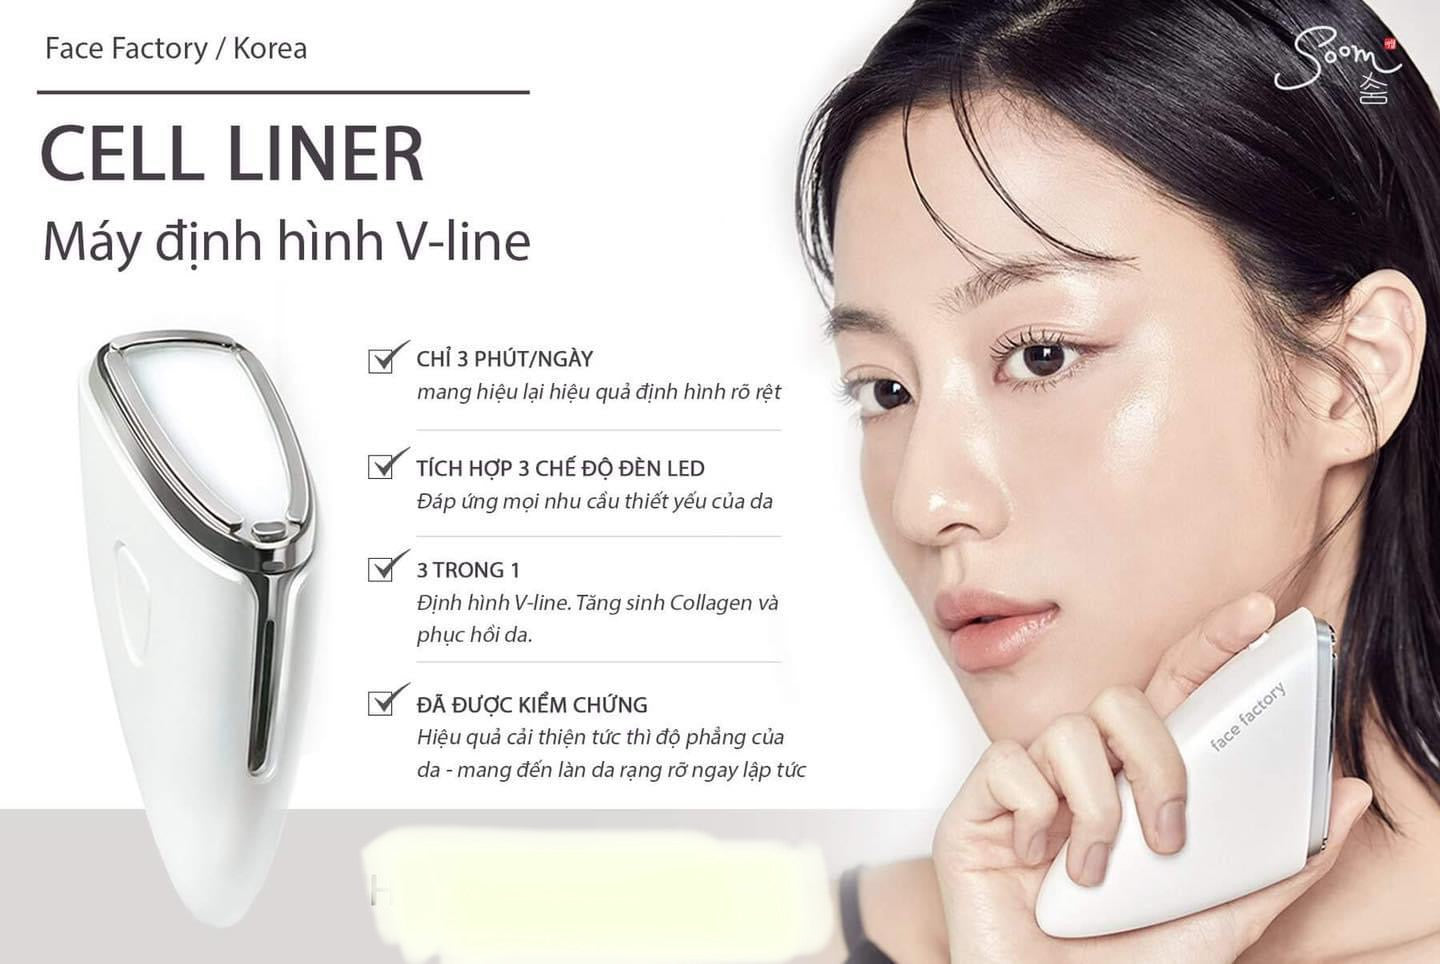 May dinh hinh Vline cell liner